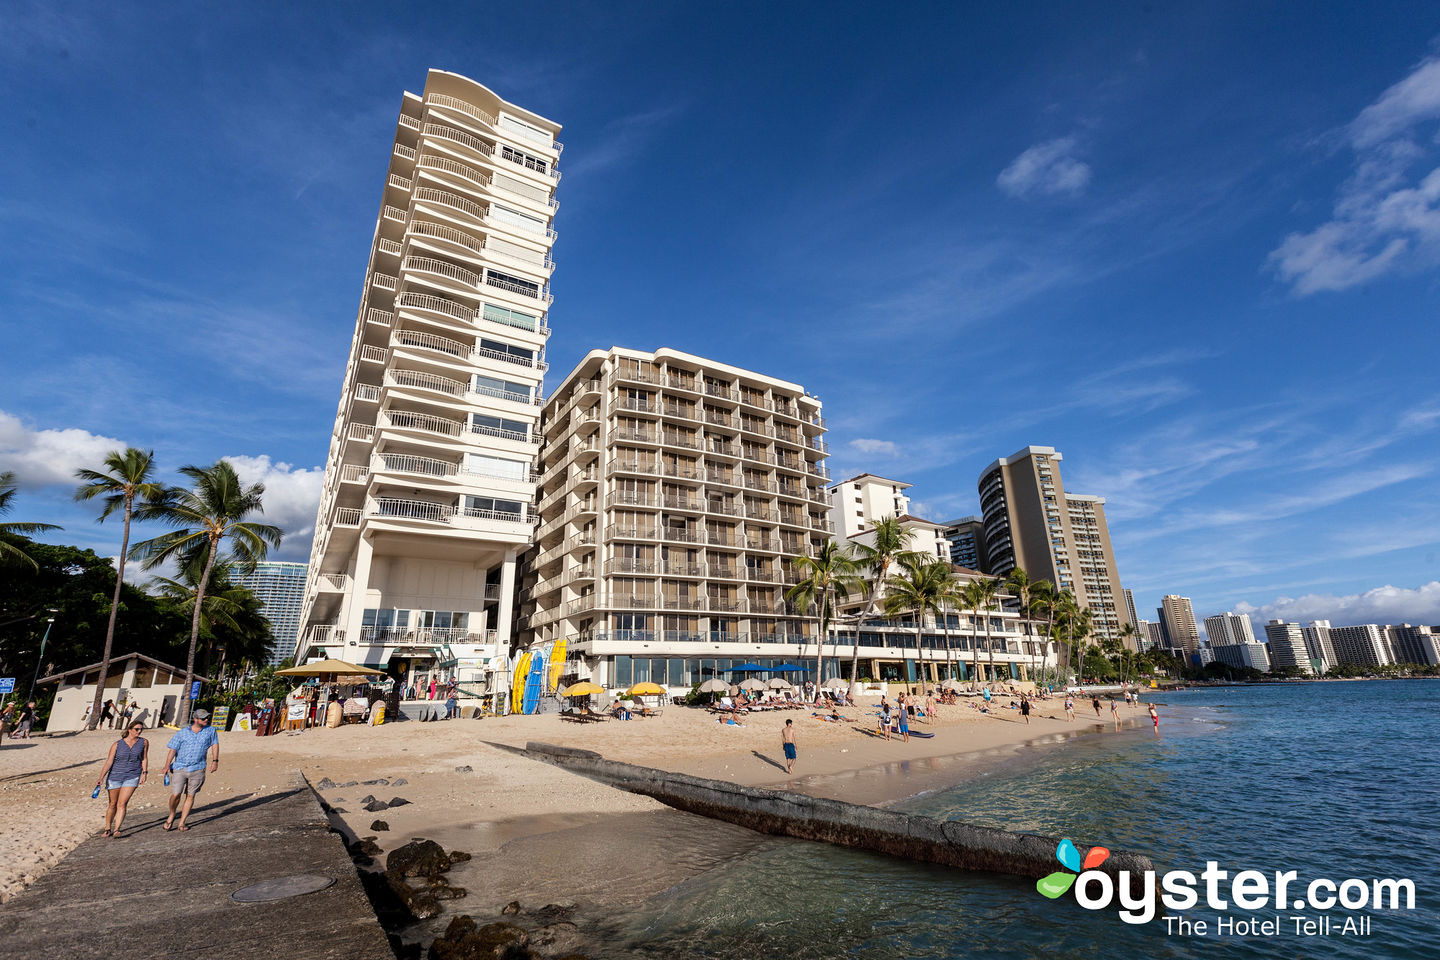 Outrigger Reef Waikiki Beach Resort Review: What To REALLY Expect If